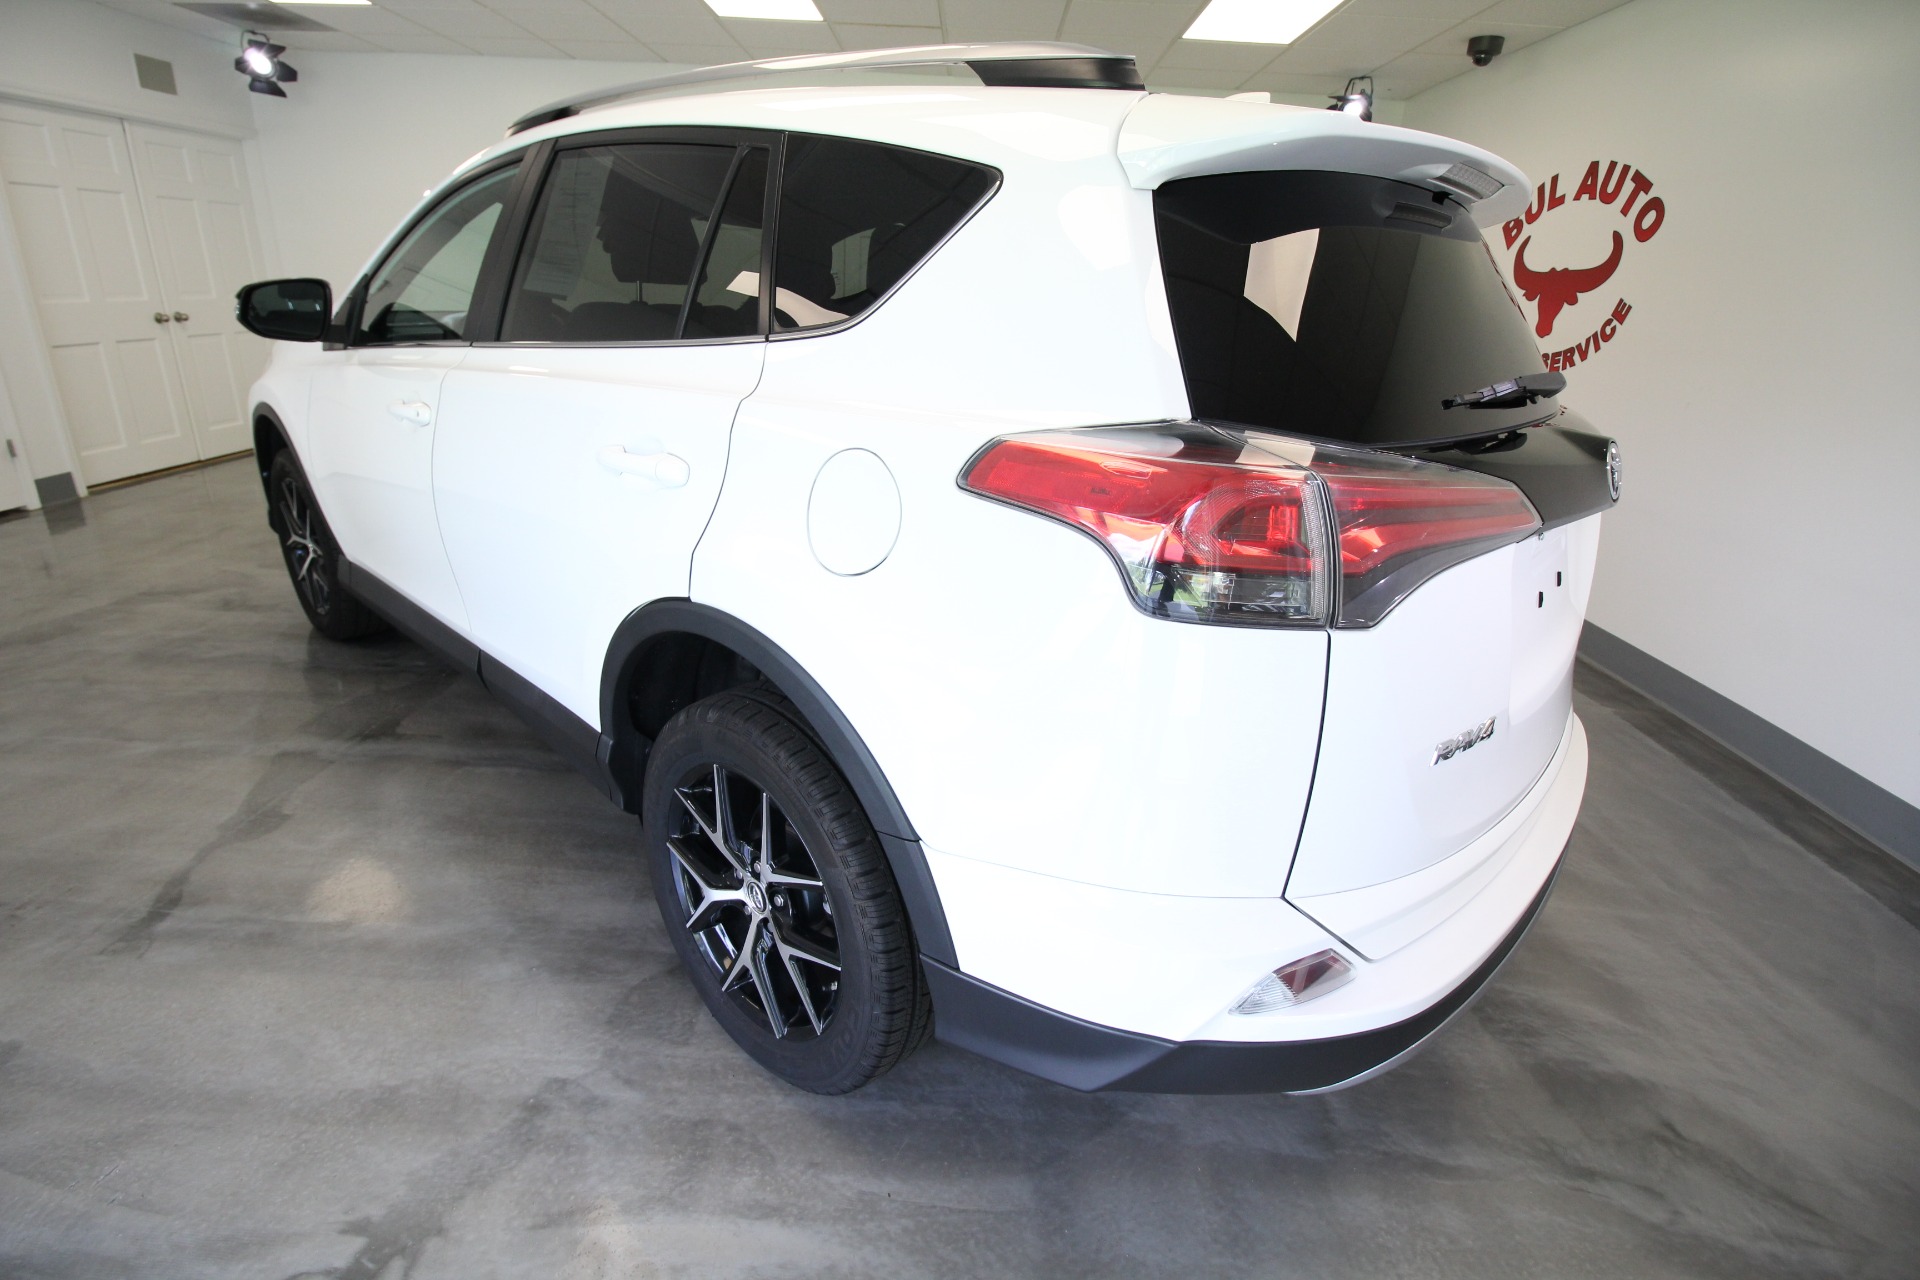 Used 2017 Super White Toyota RAV4 SE 4WD Clean - Low Miles - 2 Owner | Albany, NY